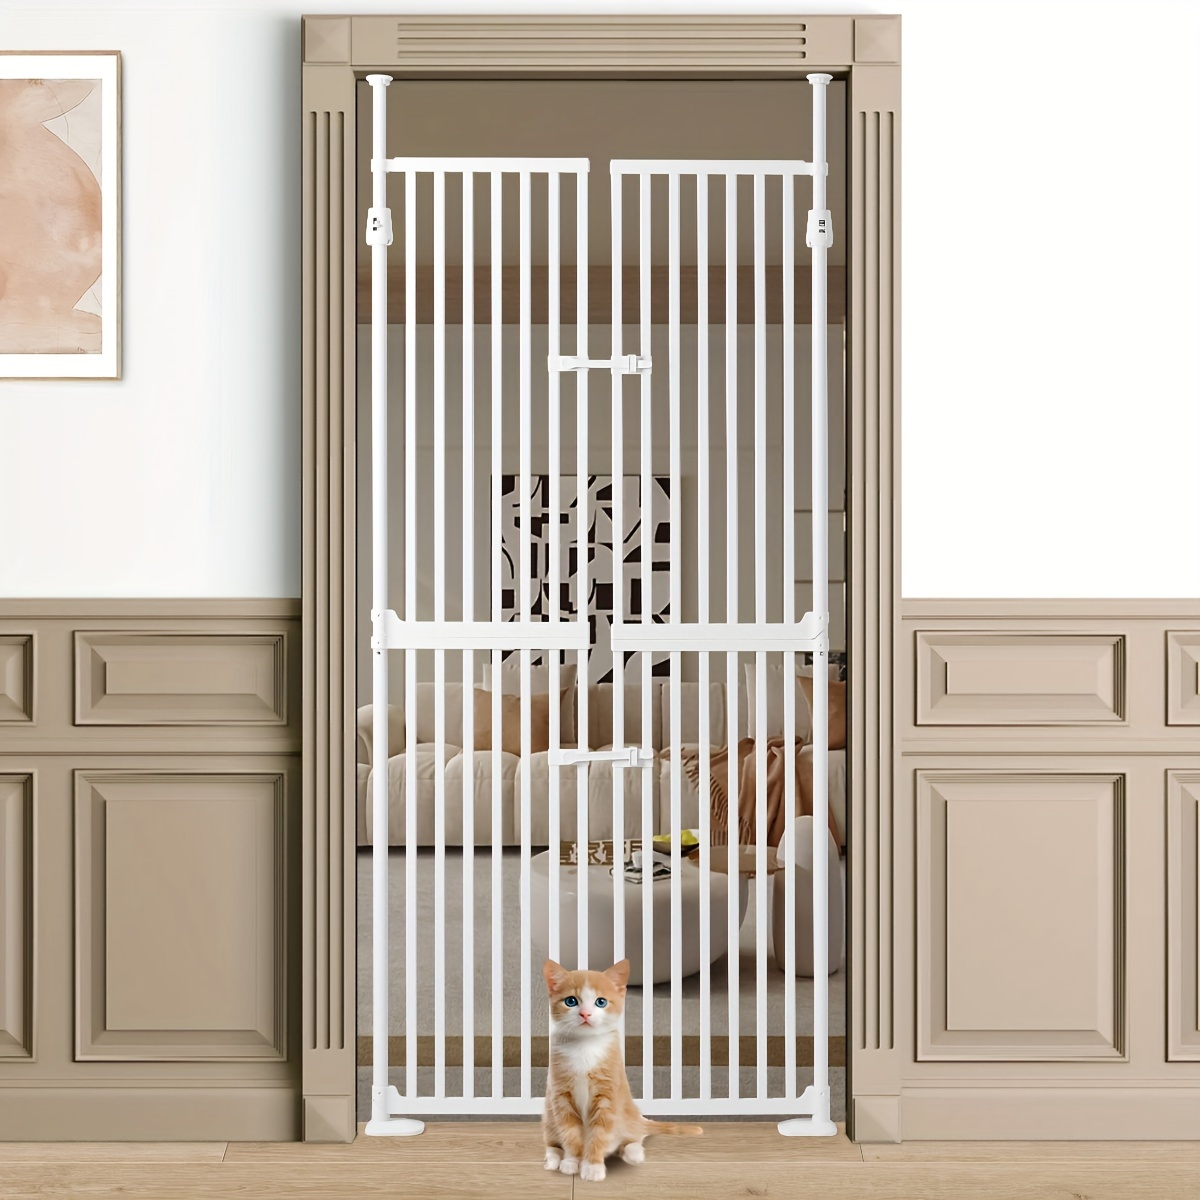 

Ulifemate 71" Extra Tall Cat Gate, 33.86-35.43" Wide Auto Close Cat Safety Gate, 1.34" Extra Narrow Gap, No Drilling Pressure Mount Design, Innovation Double Opening Pet Gate (cream White)